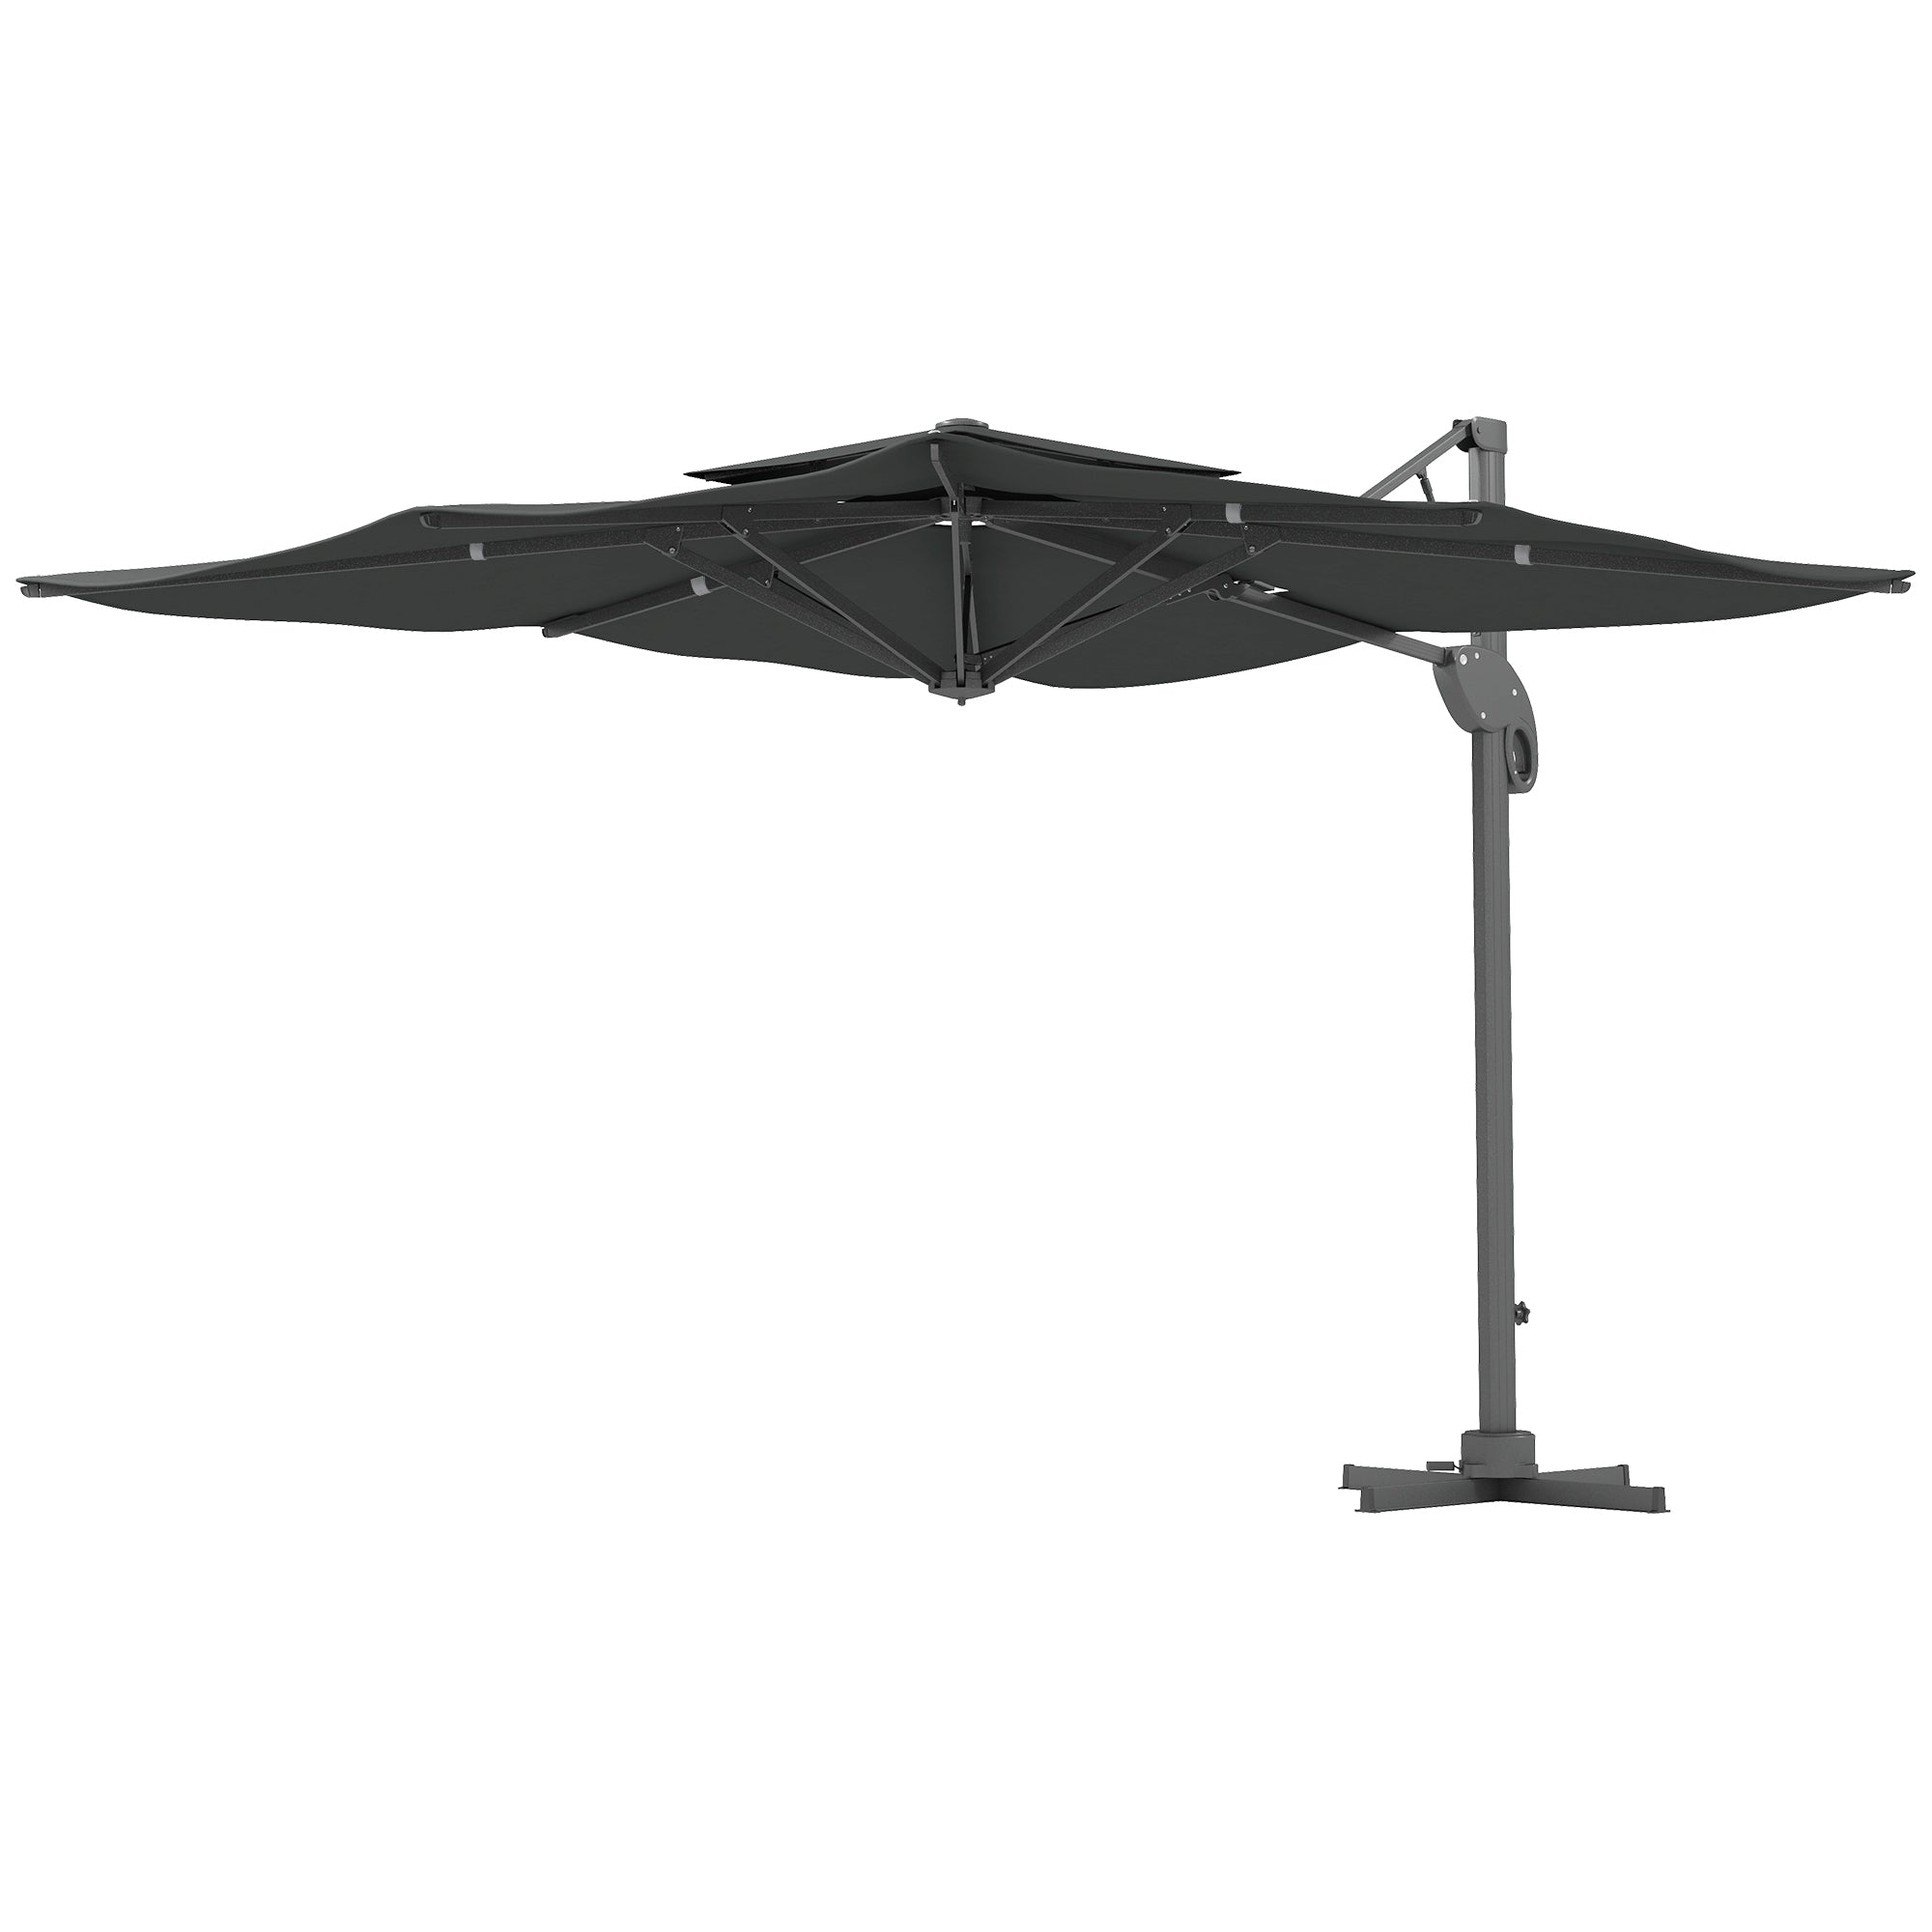 Garden Parasol, 3(m) Cantilever Parasol with Hydraulic Mechanism, Dual Vented Top, 8 Ribs, Cross Base, Grey-0